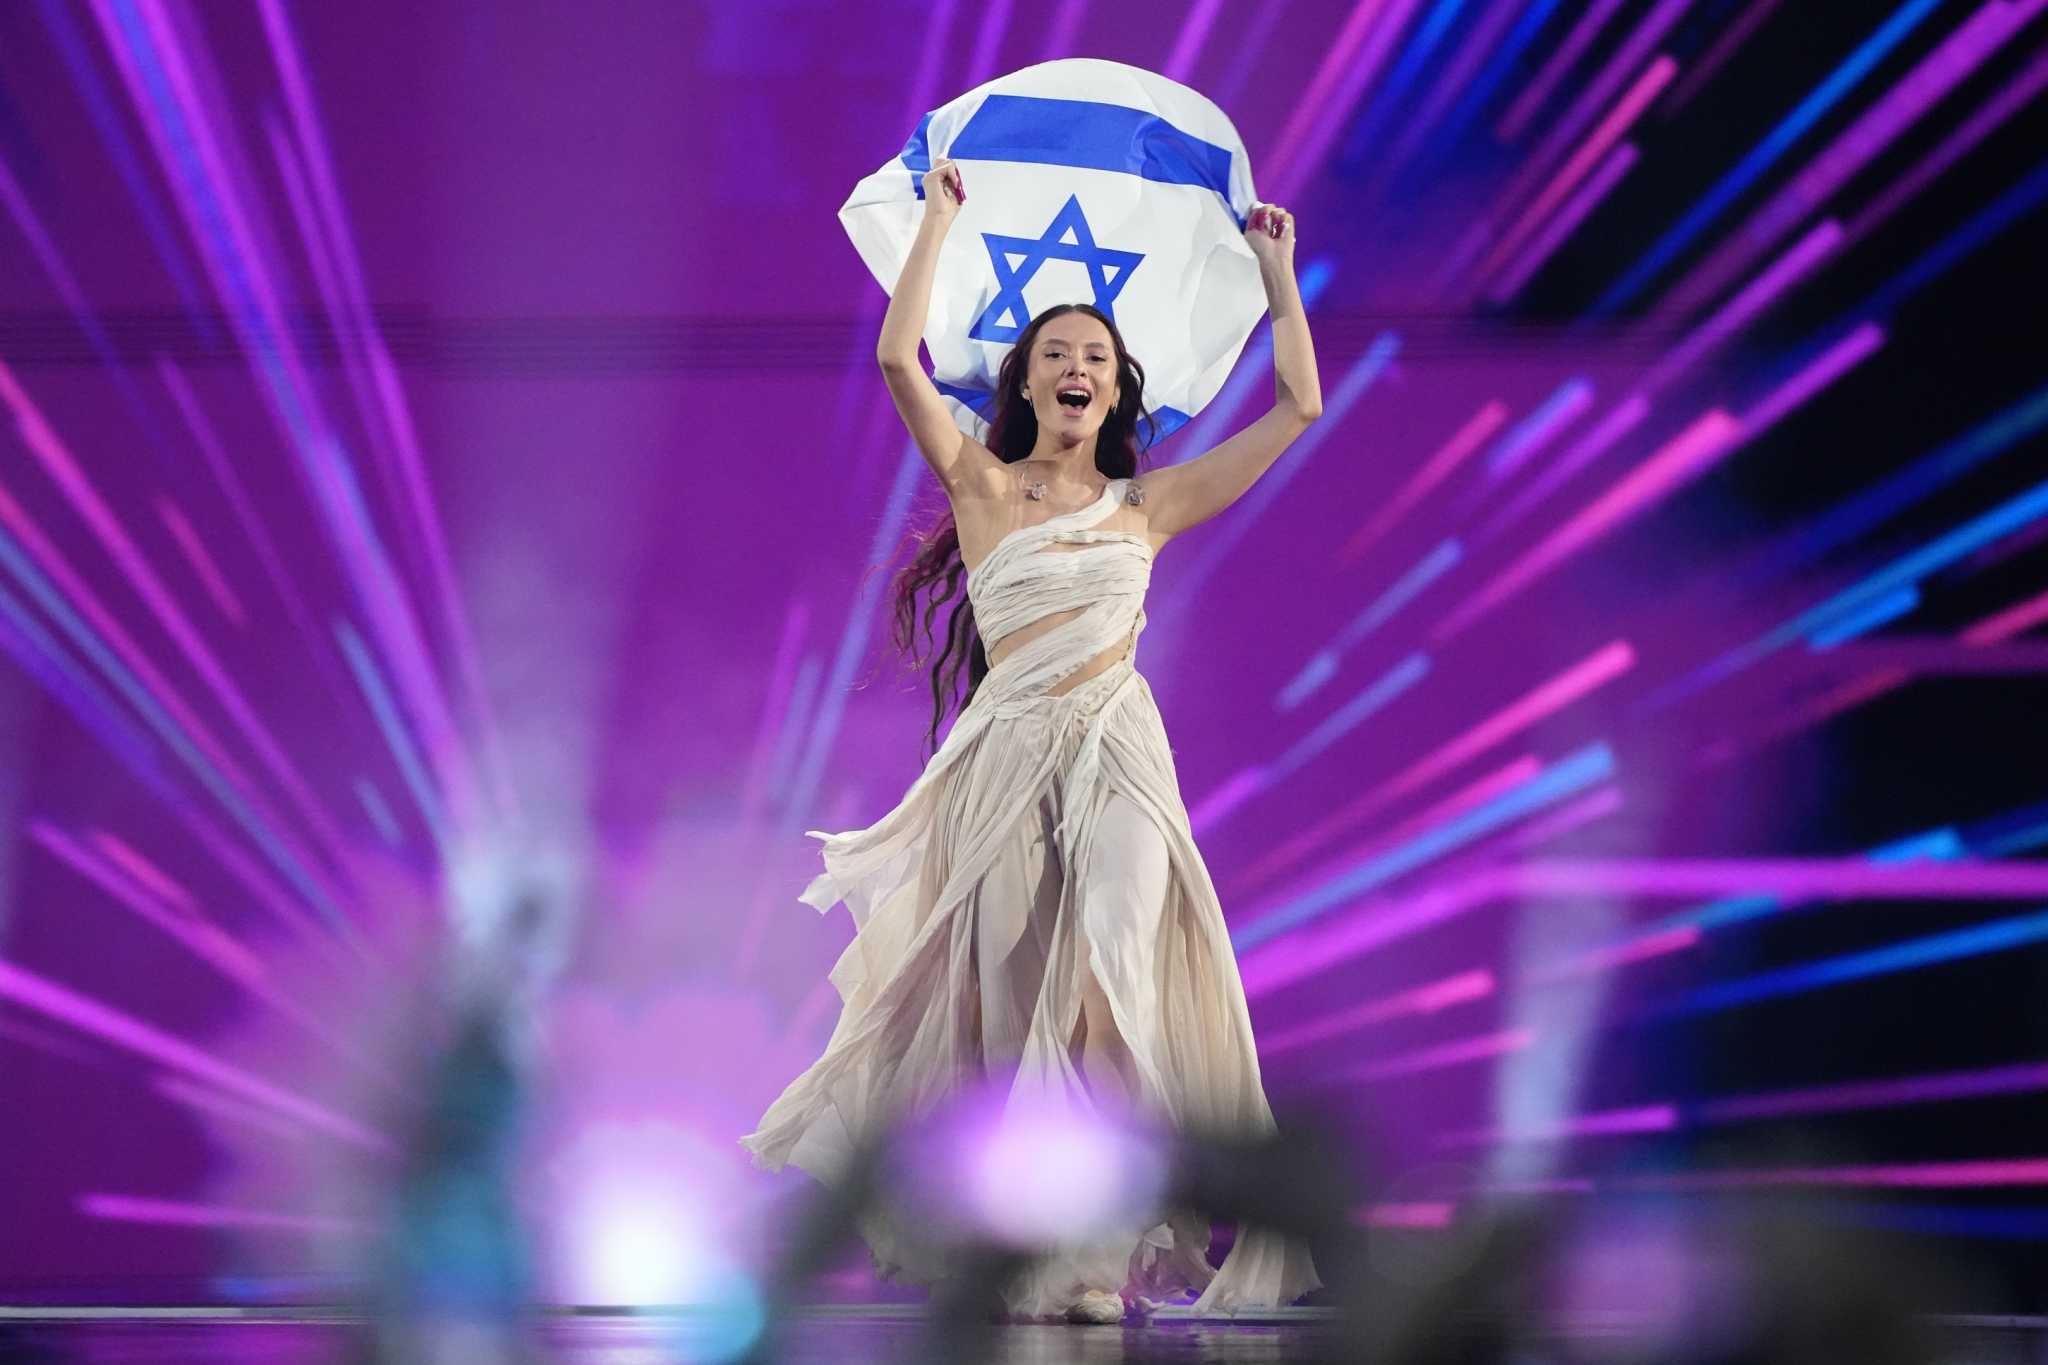 Eurovision Song Contest final kicks off after protests, backstage chaos and a contestant's expulsion